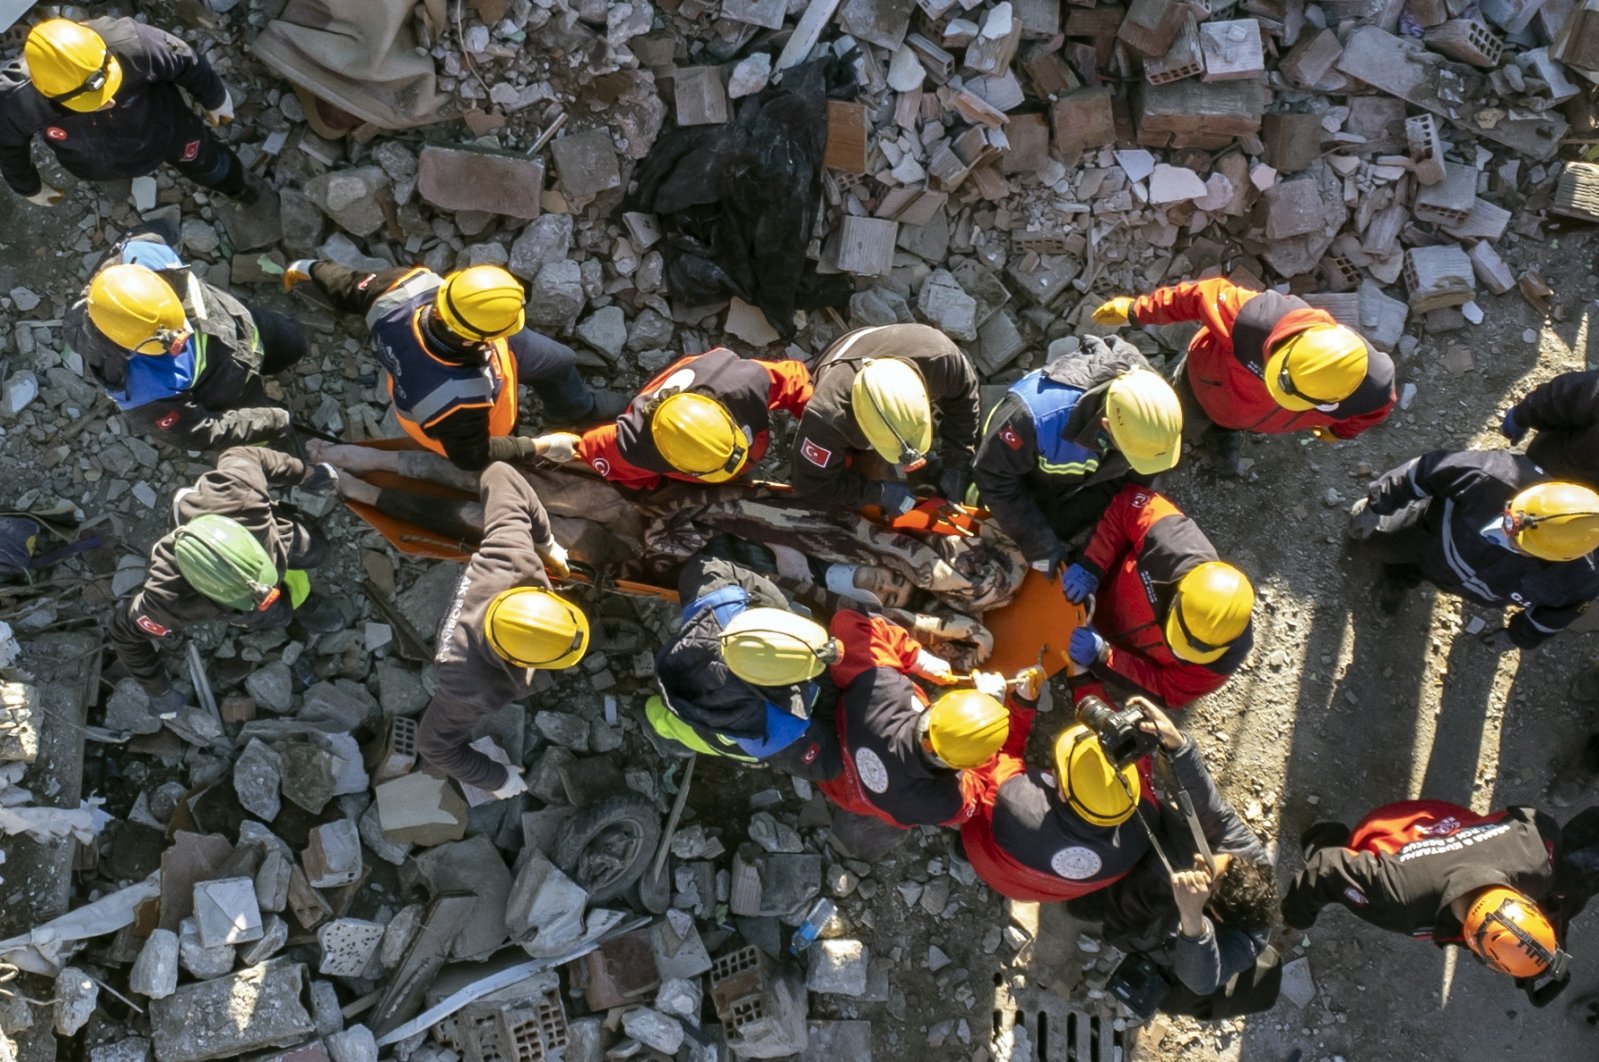 Rescuers carry a survivor who was pulled from under a collapsed building, 60 hours after an earthquake, in Hatay, Türkiye, Feb. 8, 2023. (EPA Photo)